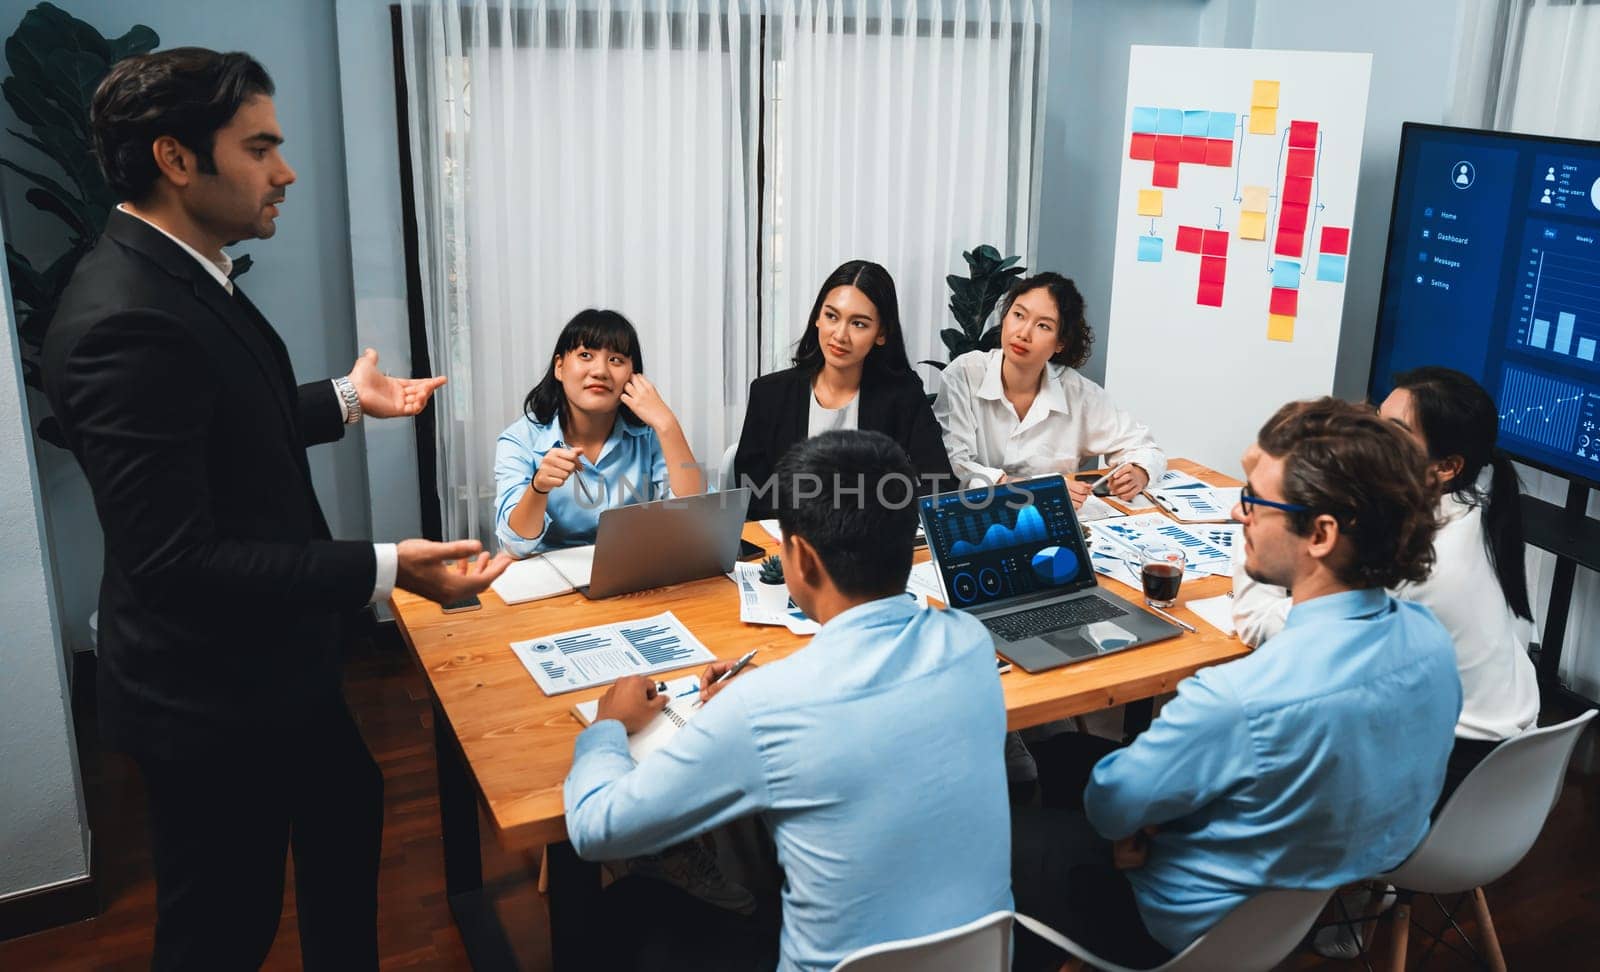 Diverse group of business analyst team analyzing financial data report. Finance data analysis chart and graph dashboard show on TV screen in meeting room for strategic marketing planning. Habiliment